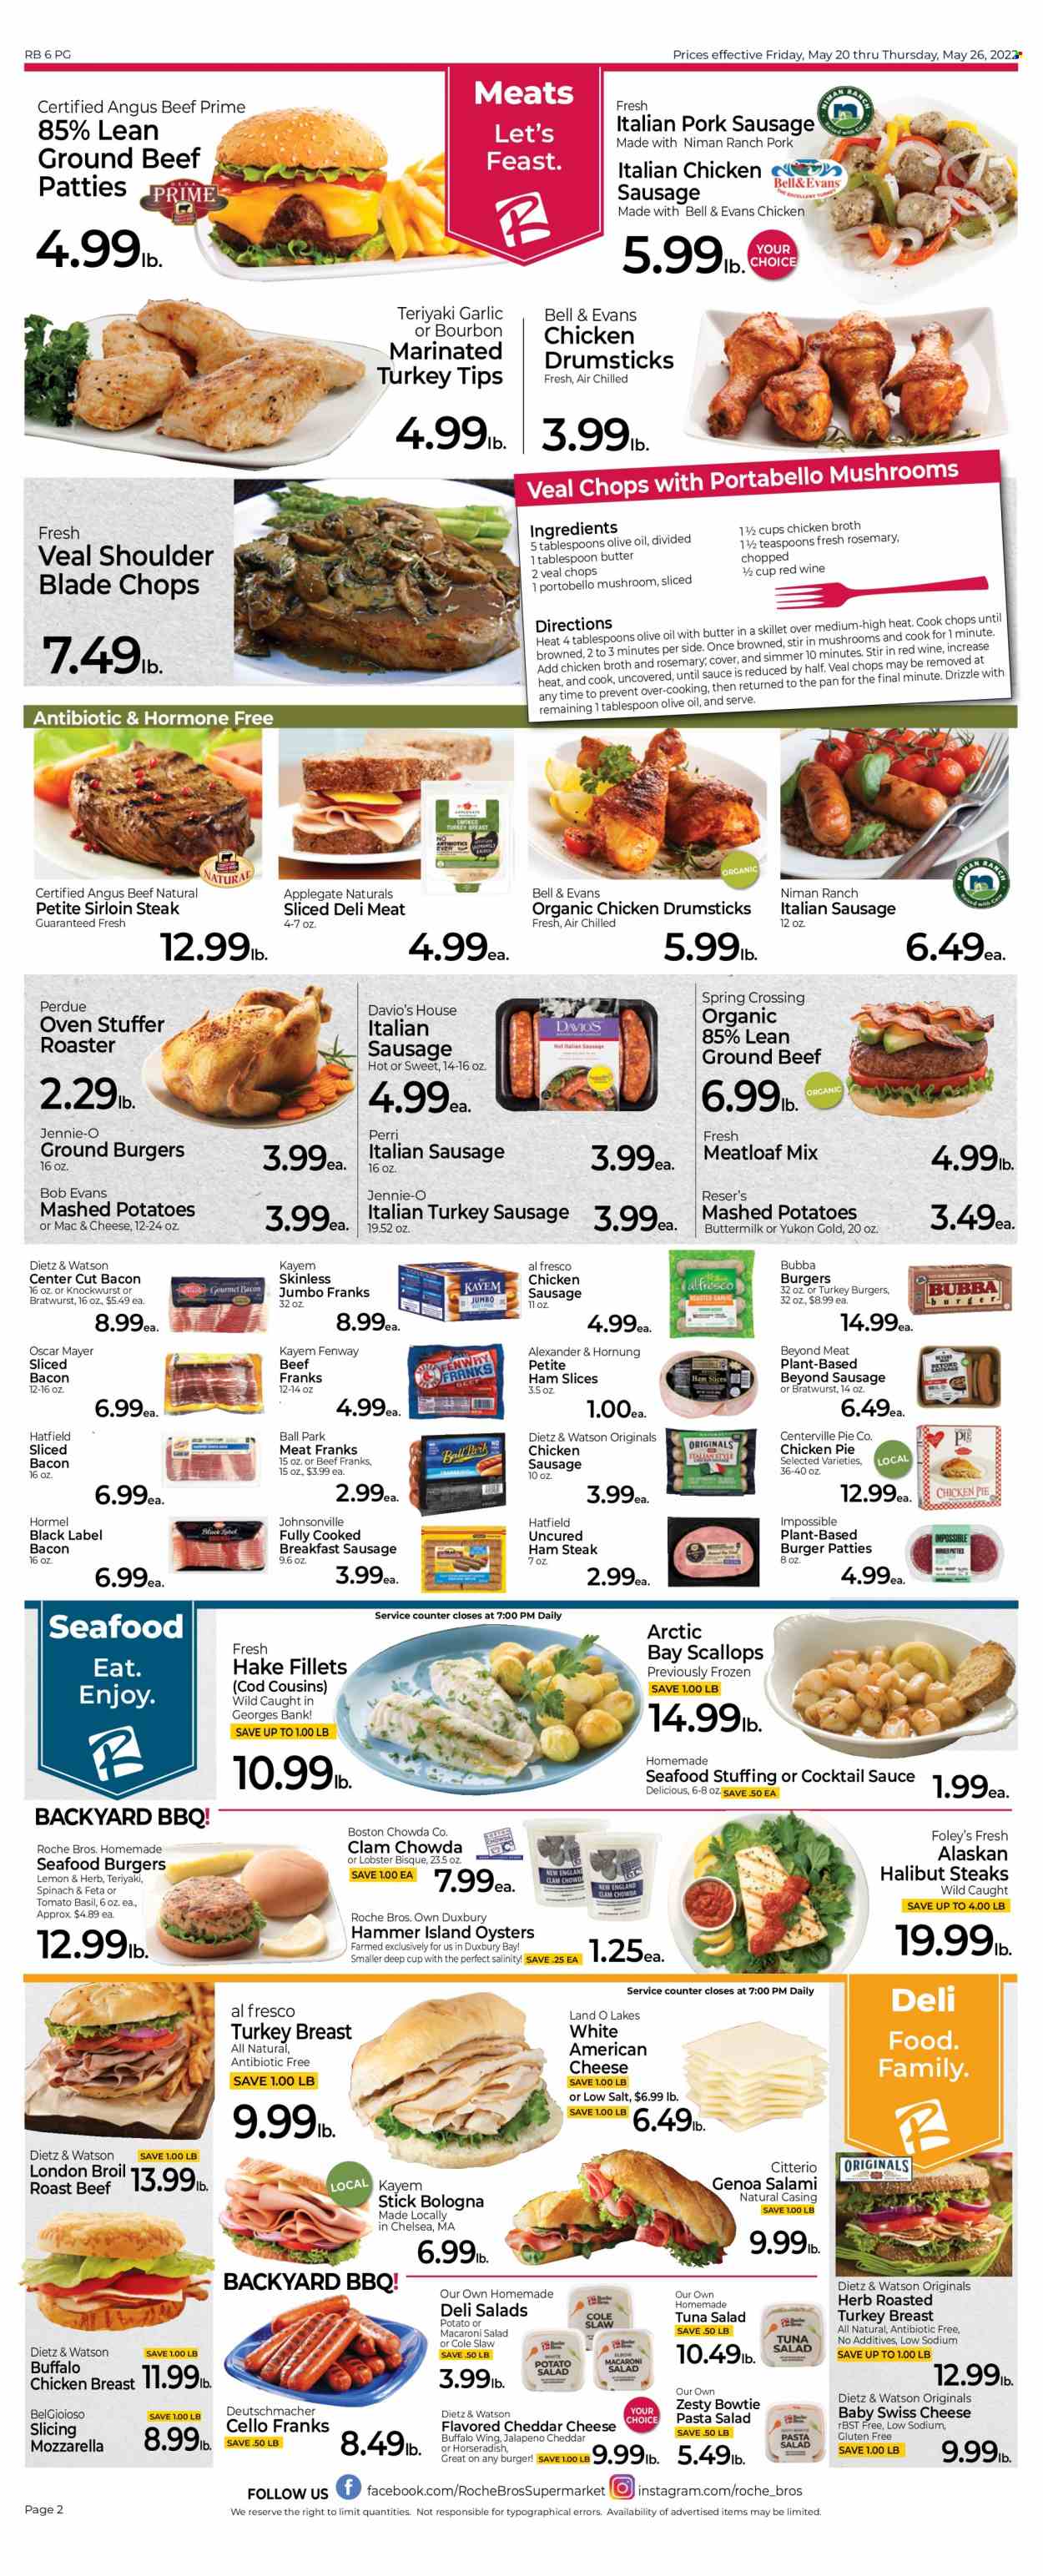 thumbnail - Roche Bros. Flyer - 05/20/2022 - 05/26/2022 - Sales products - portobello mushrooms, garlic, horseradish, jalapeño, clams, cod, lobster, scallops, tuna, halibut, oysters, seafood, hake, mashed potatoes, hamburger, pasta, meatloaf, Perdue®, Bob Evans, Hormel, bacon, salami, uncured ham, ham, bologna sausage, Johnsonville, Oscar Mayer, Dietz & Watson, bratwurst, sausage, pork sausage, chicken sausage, italian sausage, macaroni salad, tuna salad, pasta salad, ham steaks, american cheese, mozzarella, swiss cheese, cheddar, buttermilk, chicken broth, broth, esponja, rosemary, cocktail sauce, olive oil, rosé wine, chicken drumsticks, beef meat, beef sirloin, ground beef, veal cutlet, veal meat, steak, roast beef, sirloin steak, burger patties, turkey burger. Page 2.